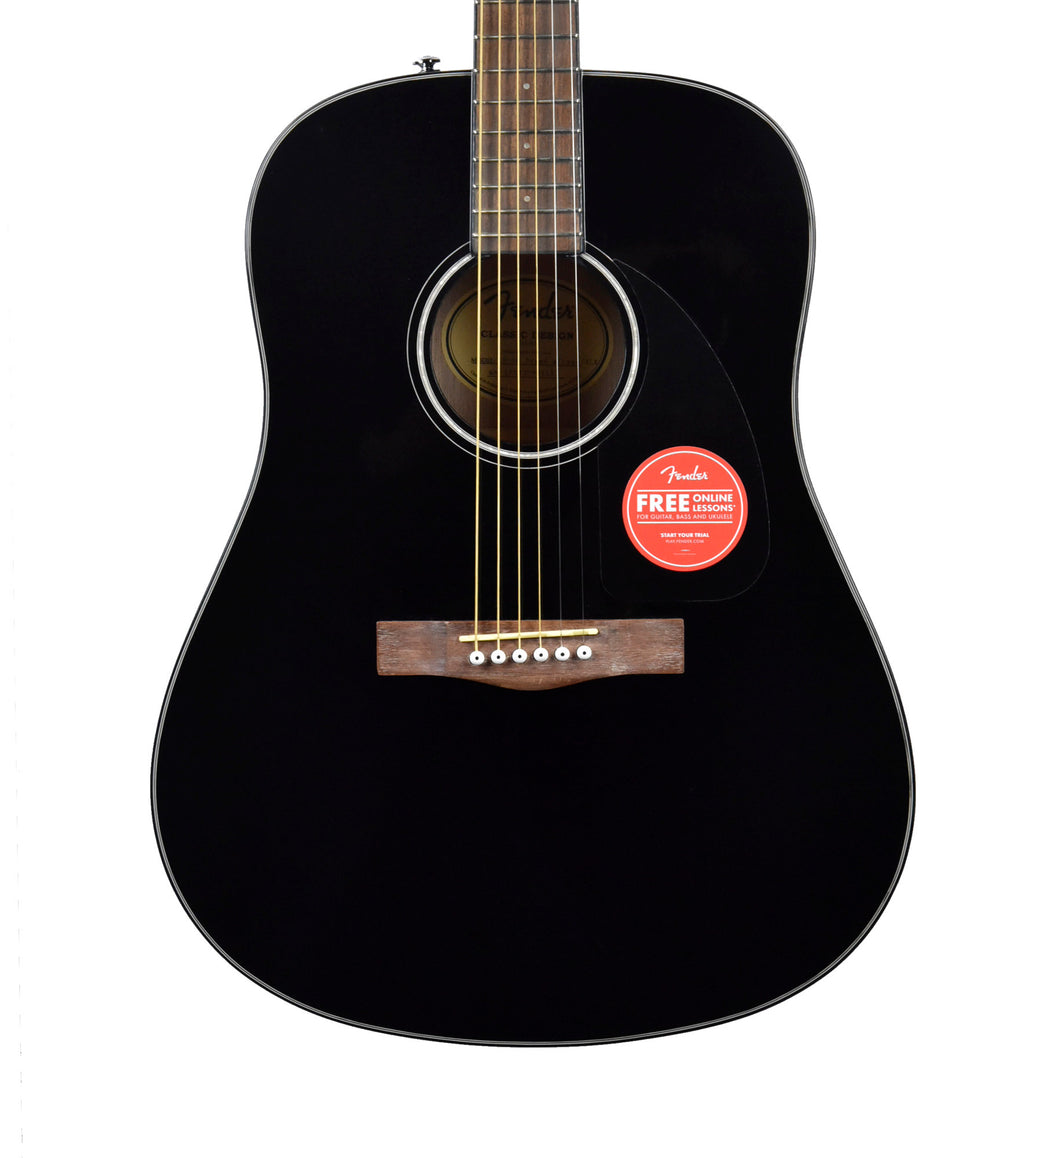 Fender CD-60 Dreadnought V3 Acoustic Guitar w/Case in Black IPS230901080 - The Music Gallery